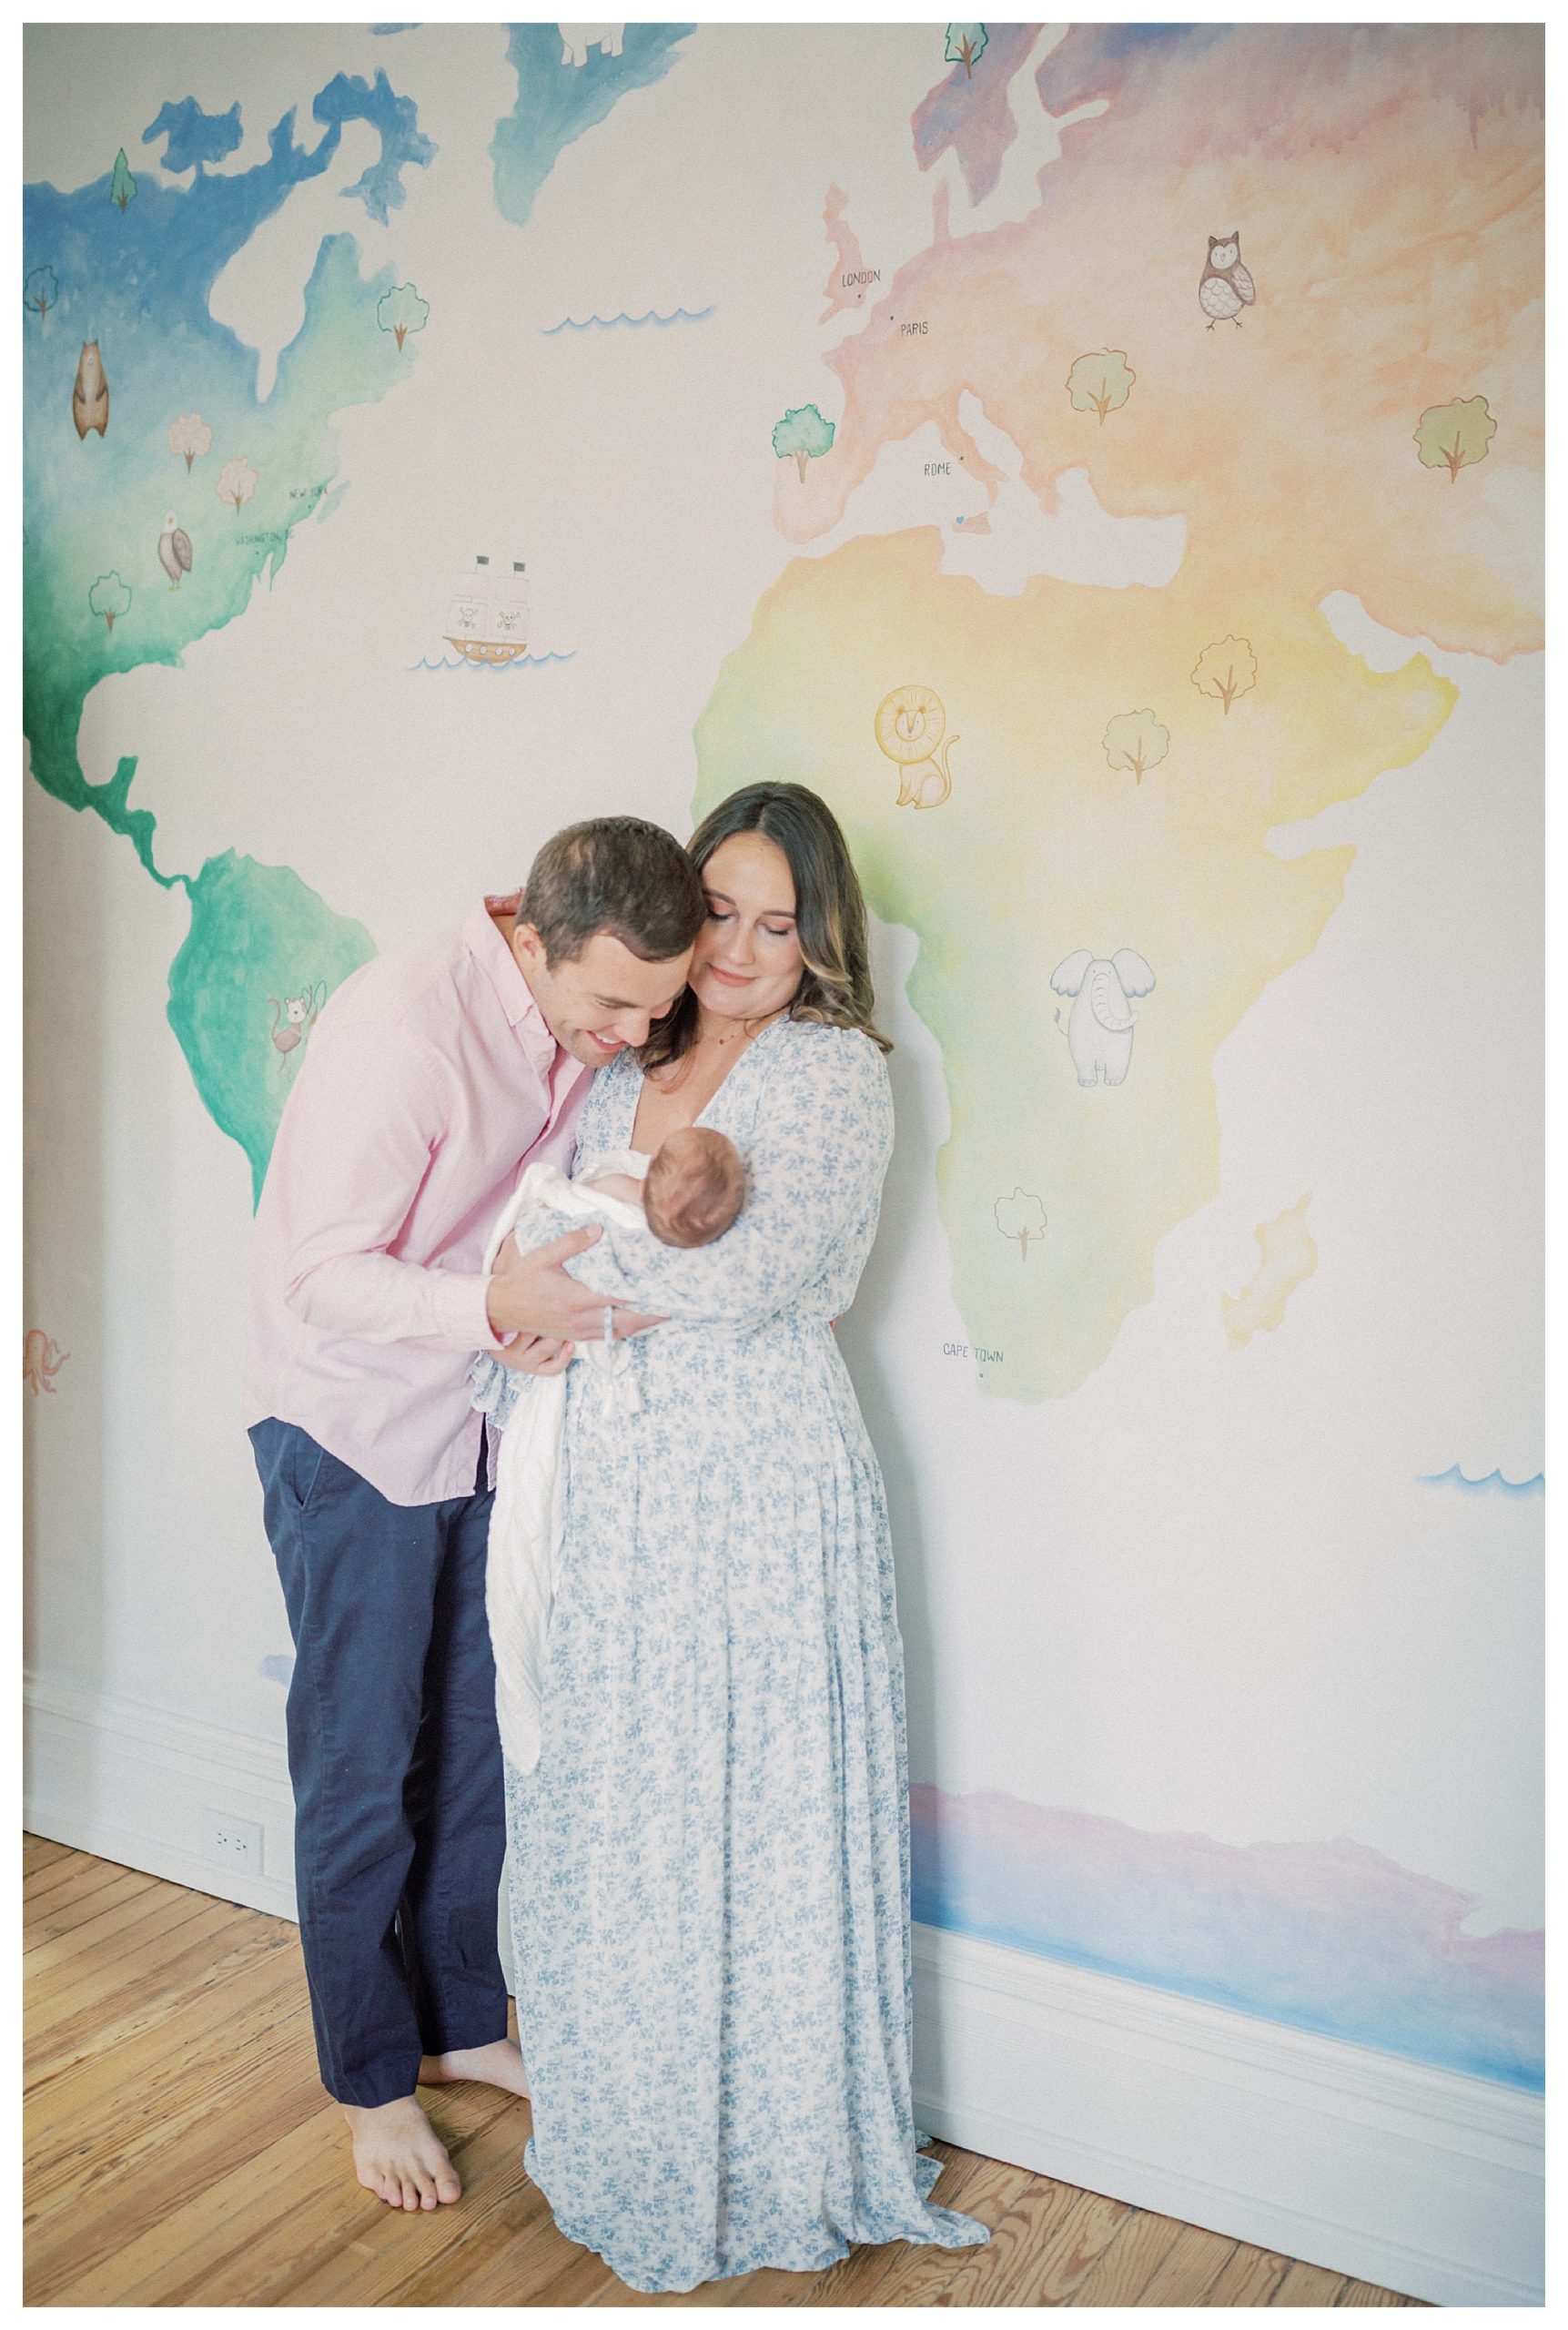 Father leans over and smiles at newborn baby held by mother as they stand in front of painted mural in nursery.